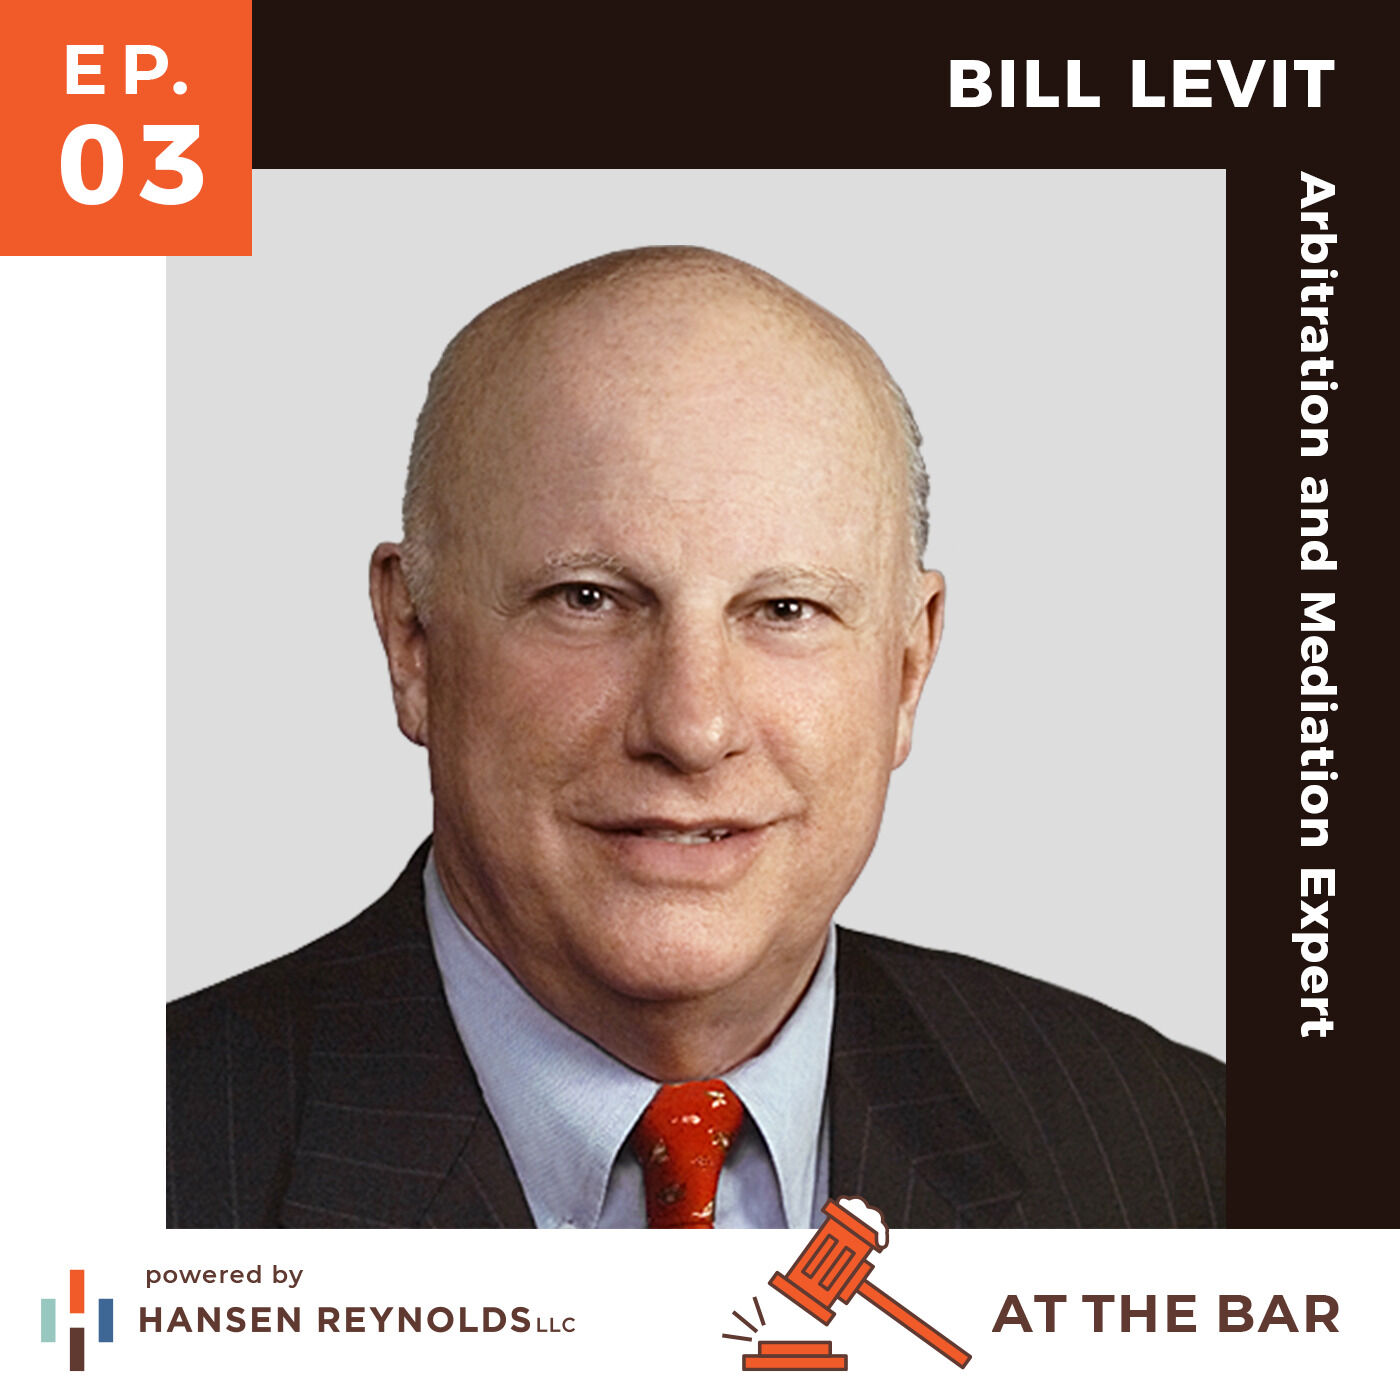 At the Bar episode three cover with Bill Levit